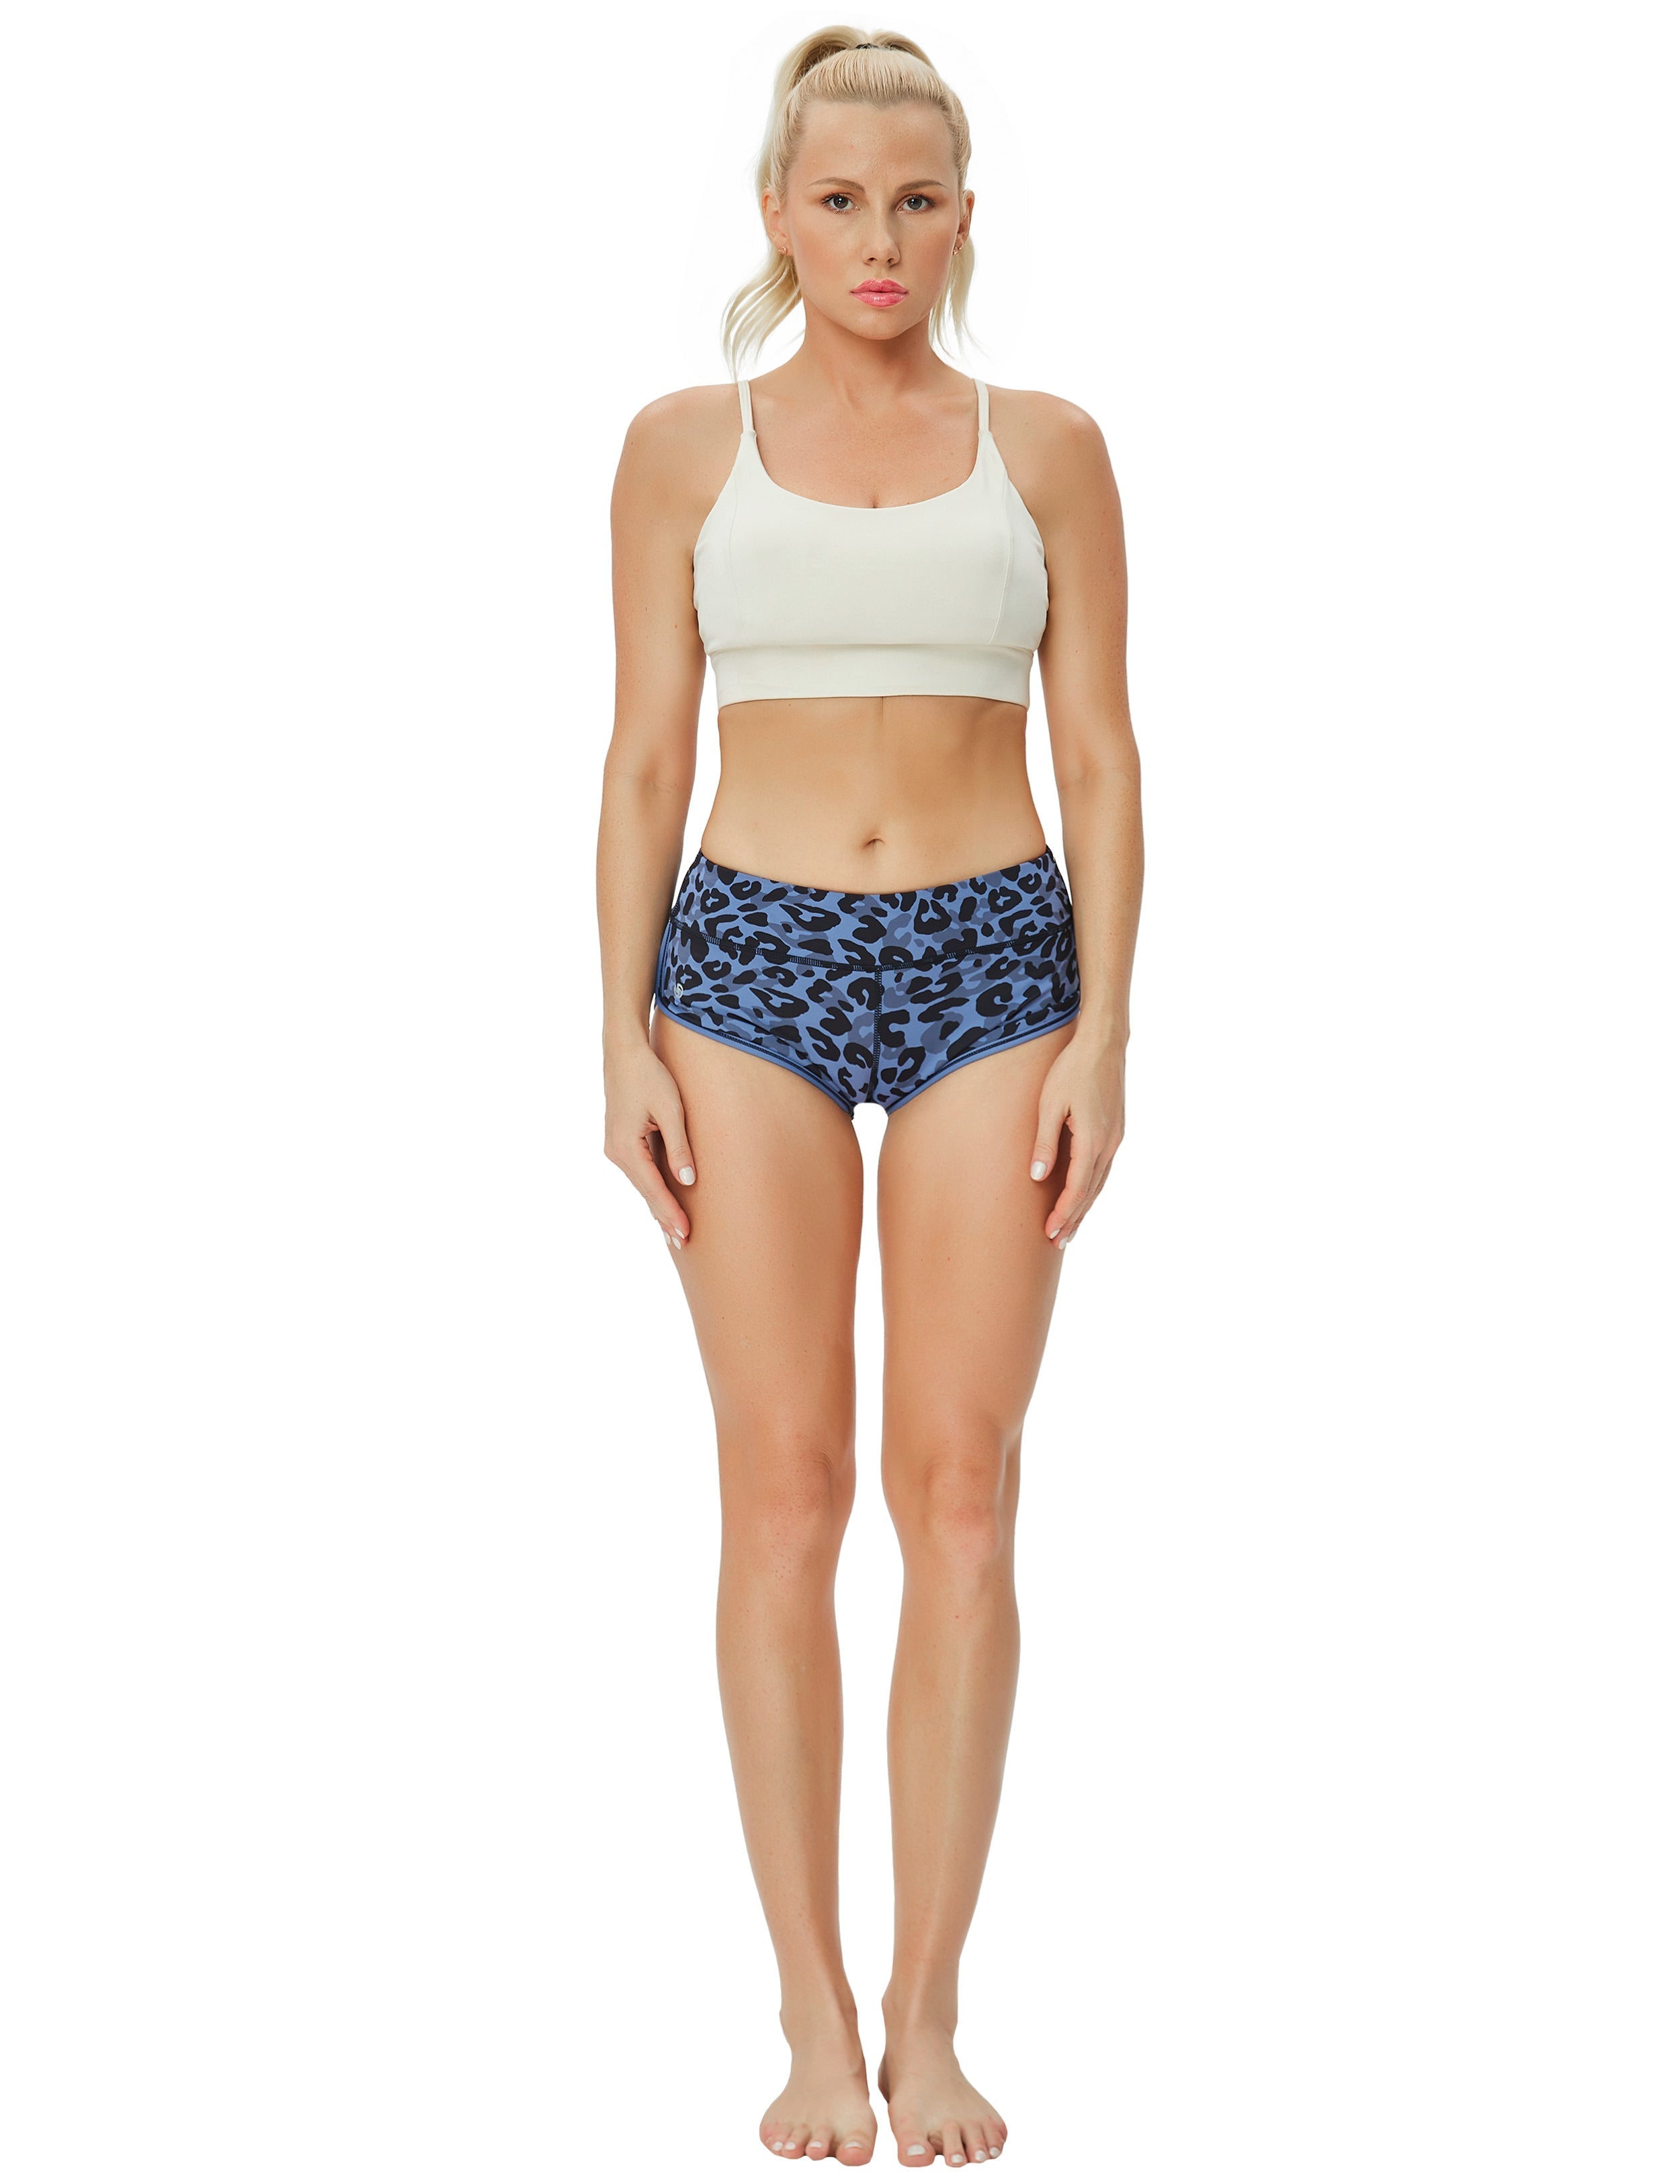 Printed Booty Tall Size Shorts navy_leopard Sleek, soft, smooth and totally comfortable: our newest sexy style is here. Softest-ever fabric High elasticity High density 4-way stretch Fabric doesn't attract lint easily No see-through Moisture-wicking Machine wash 78% Polyester, 22% Spandex